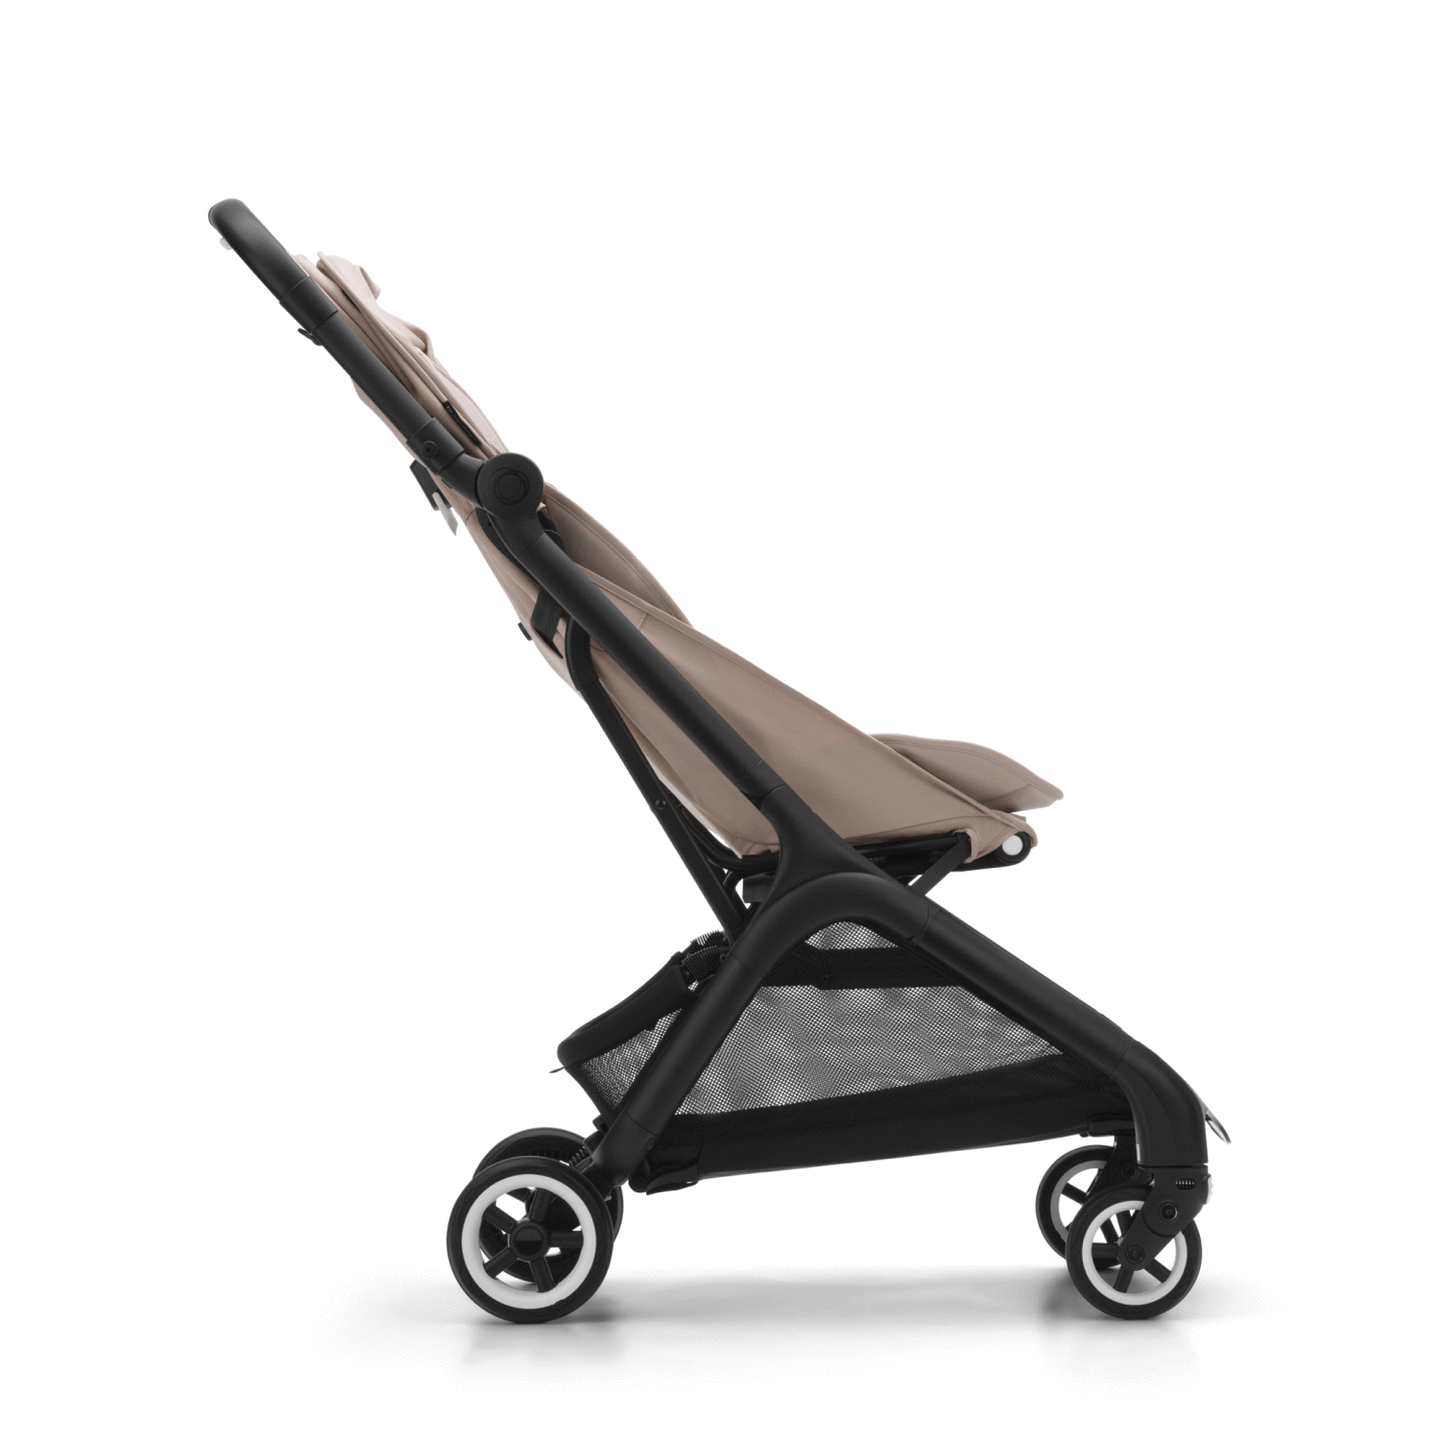 A sequence of images showing the Bugaboo Butterfly pram in motion as it folds down into an ultra-compact package.